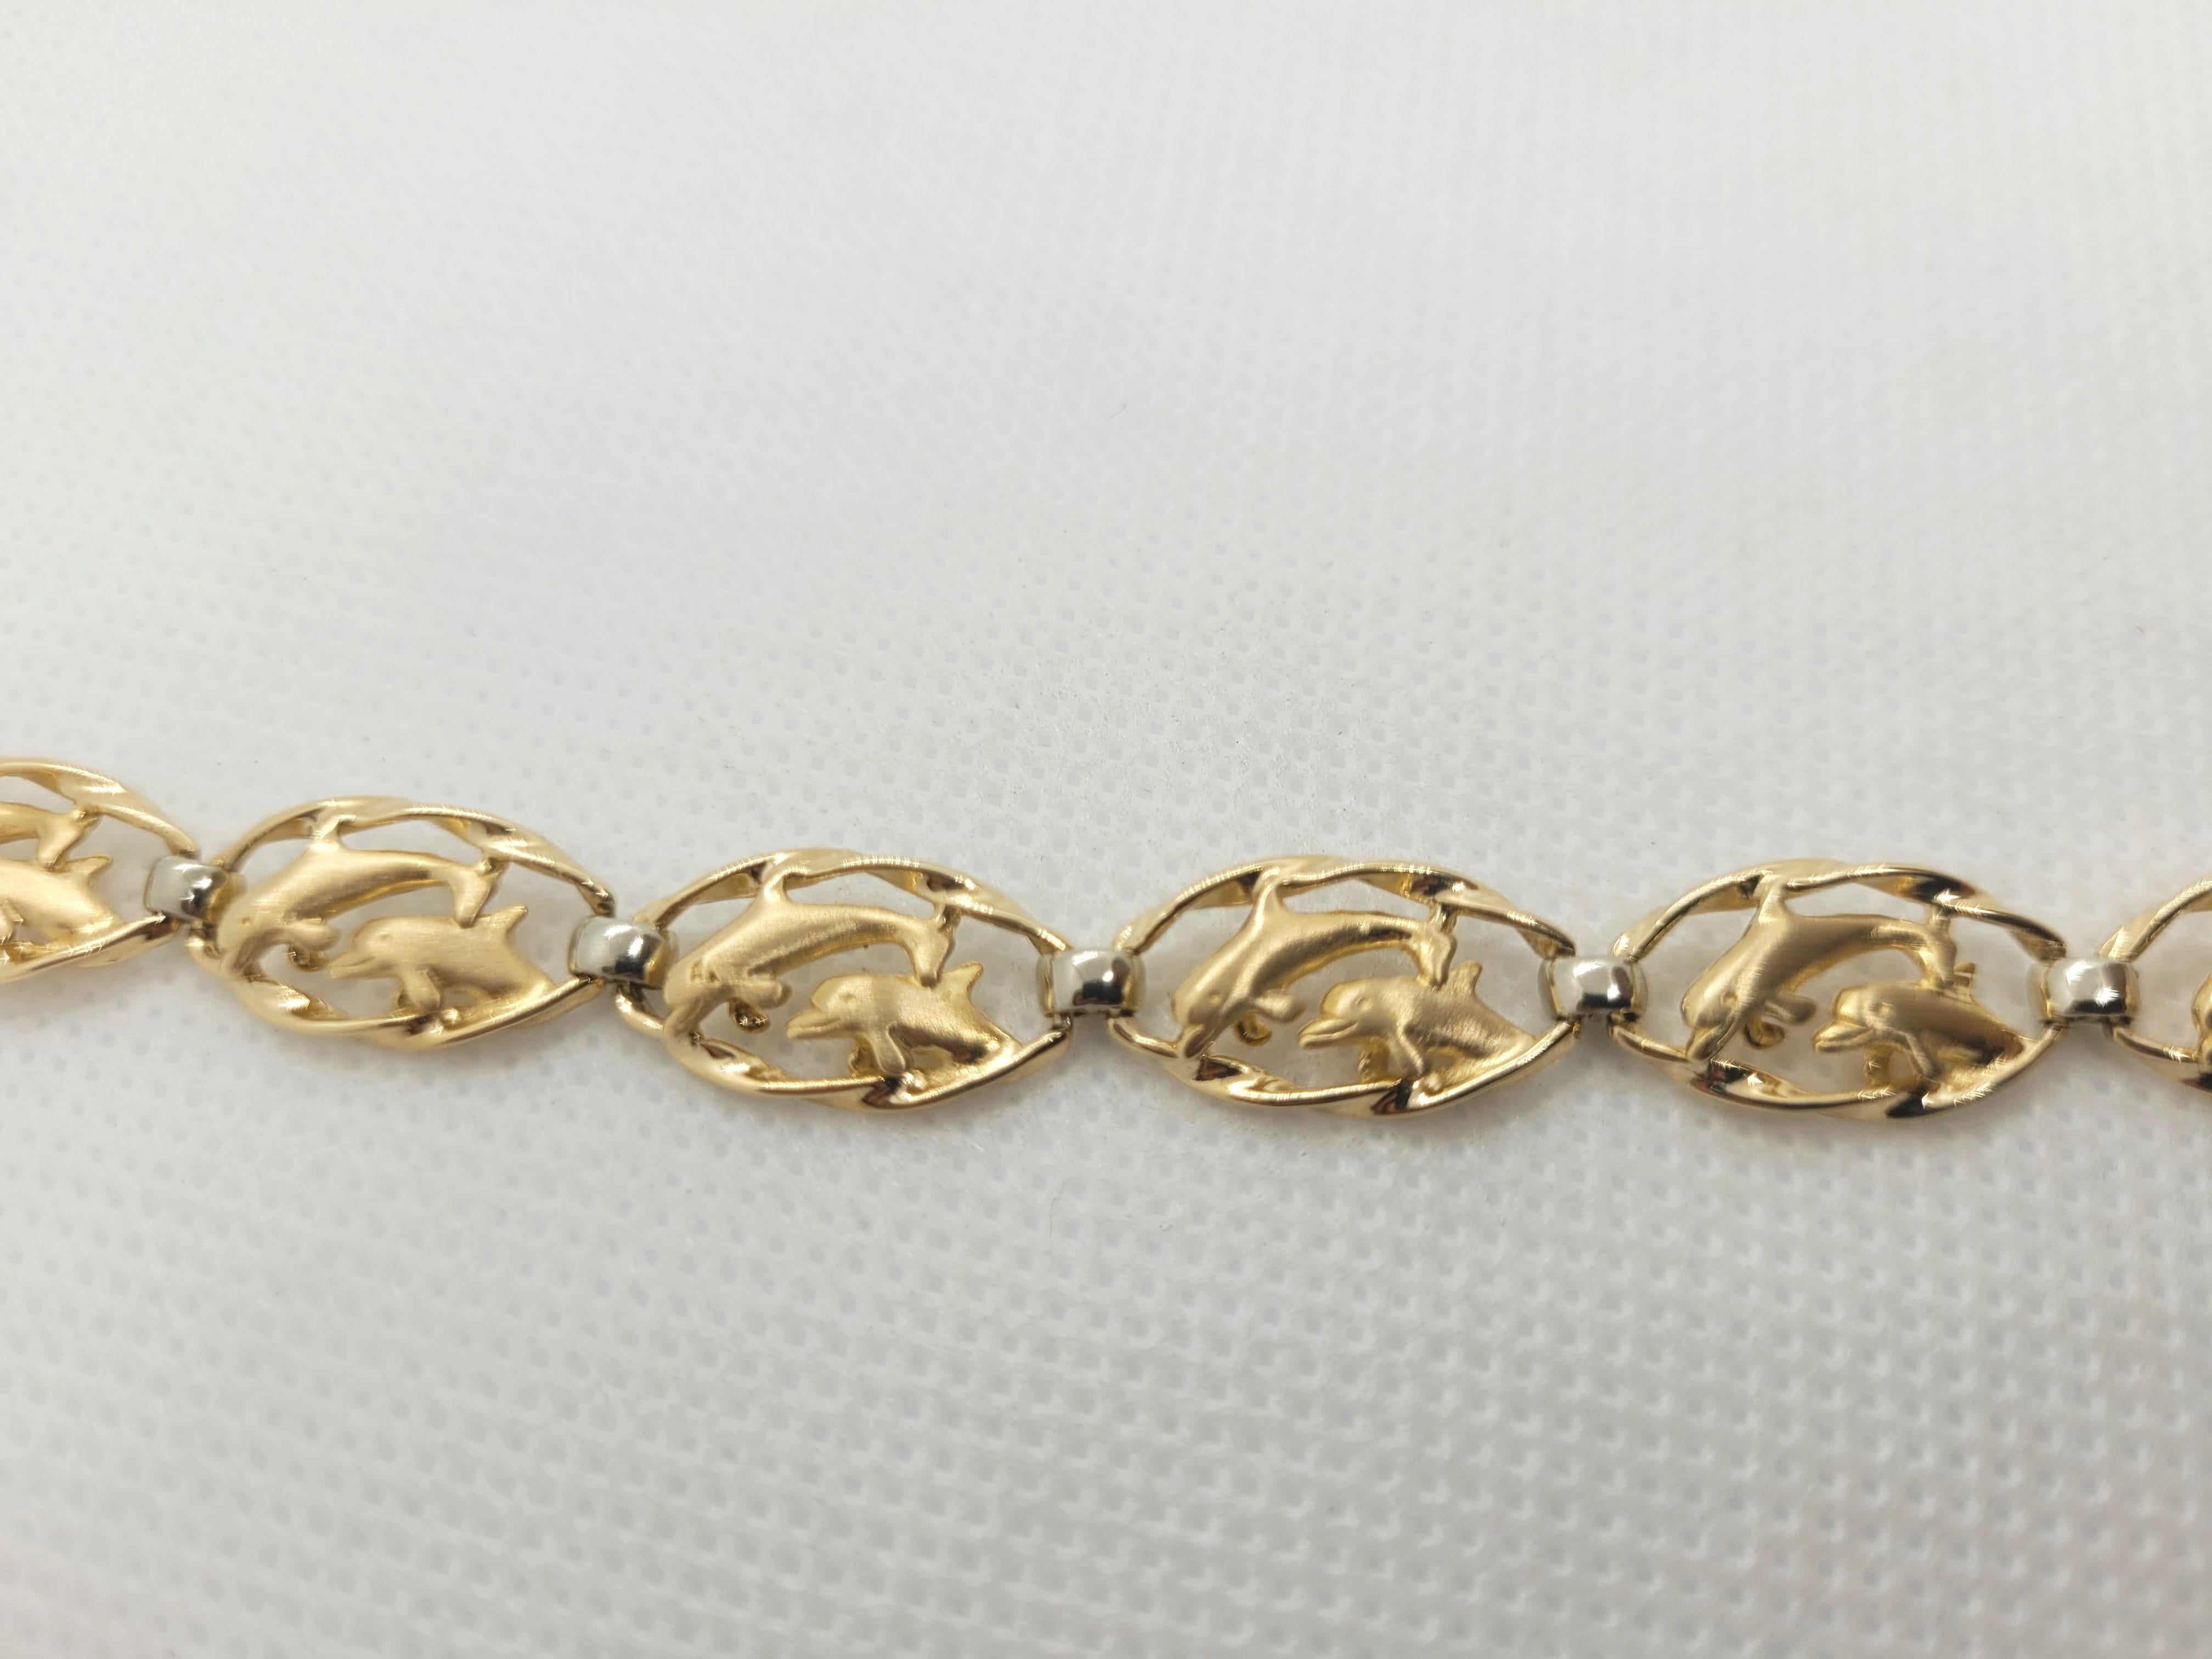 14kt Two Tone Gold Dolphin Bracelet, 11.2 Grams, Safety In Good Condition For Sale In Rancho Santa Fe, CA